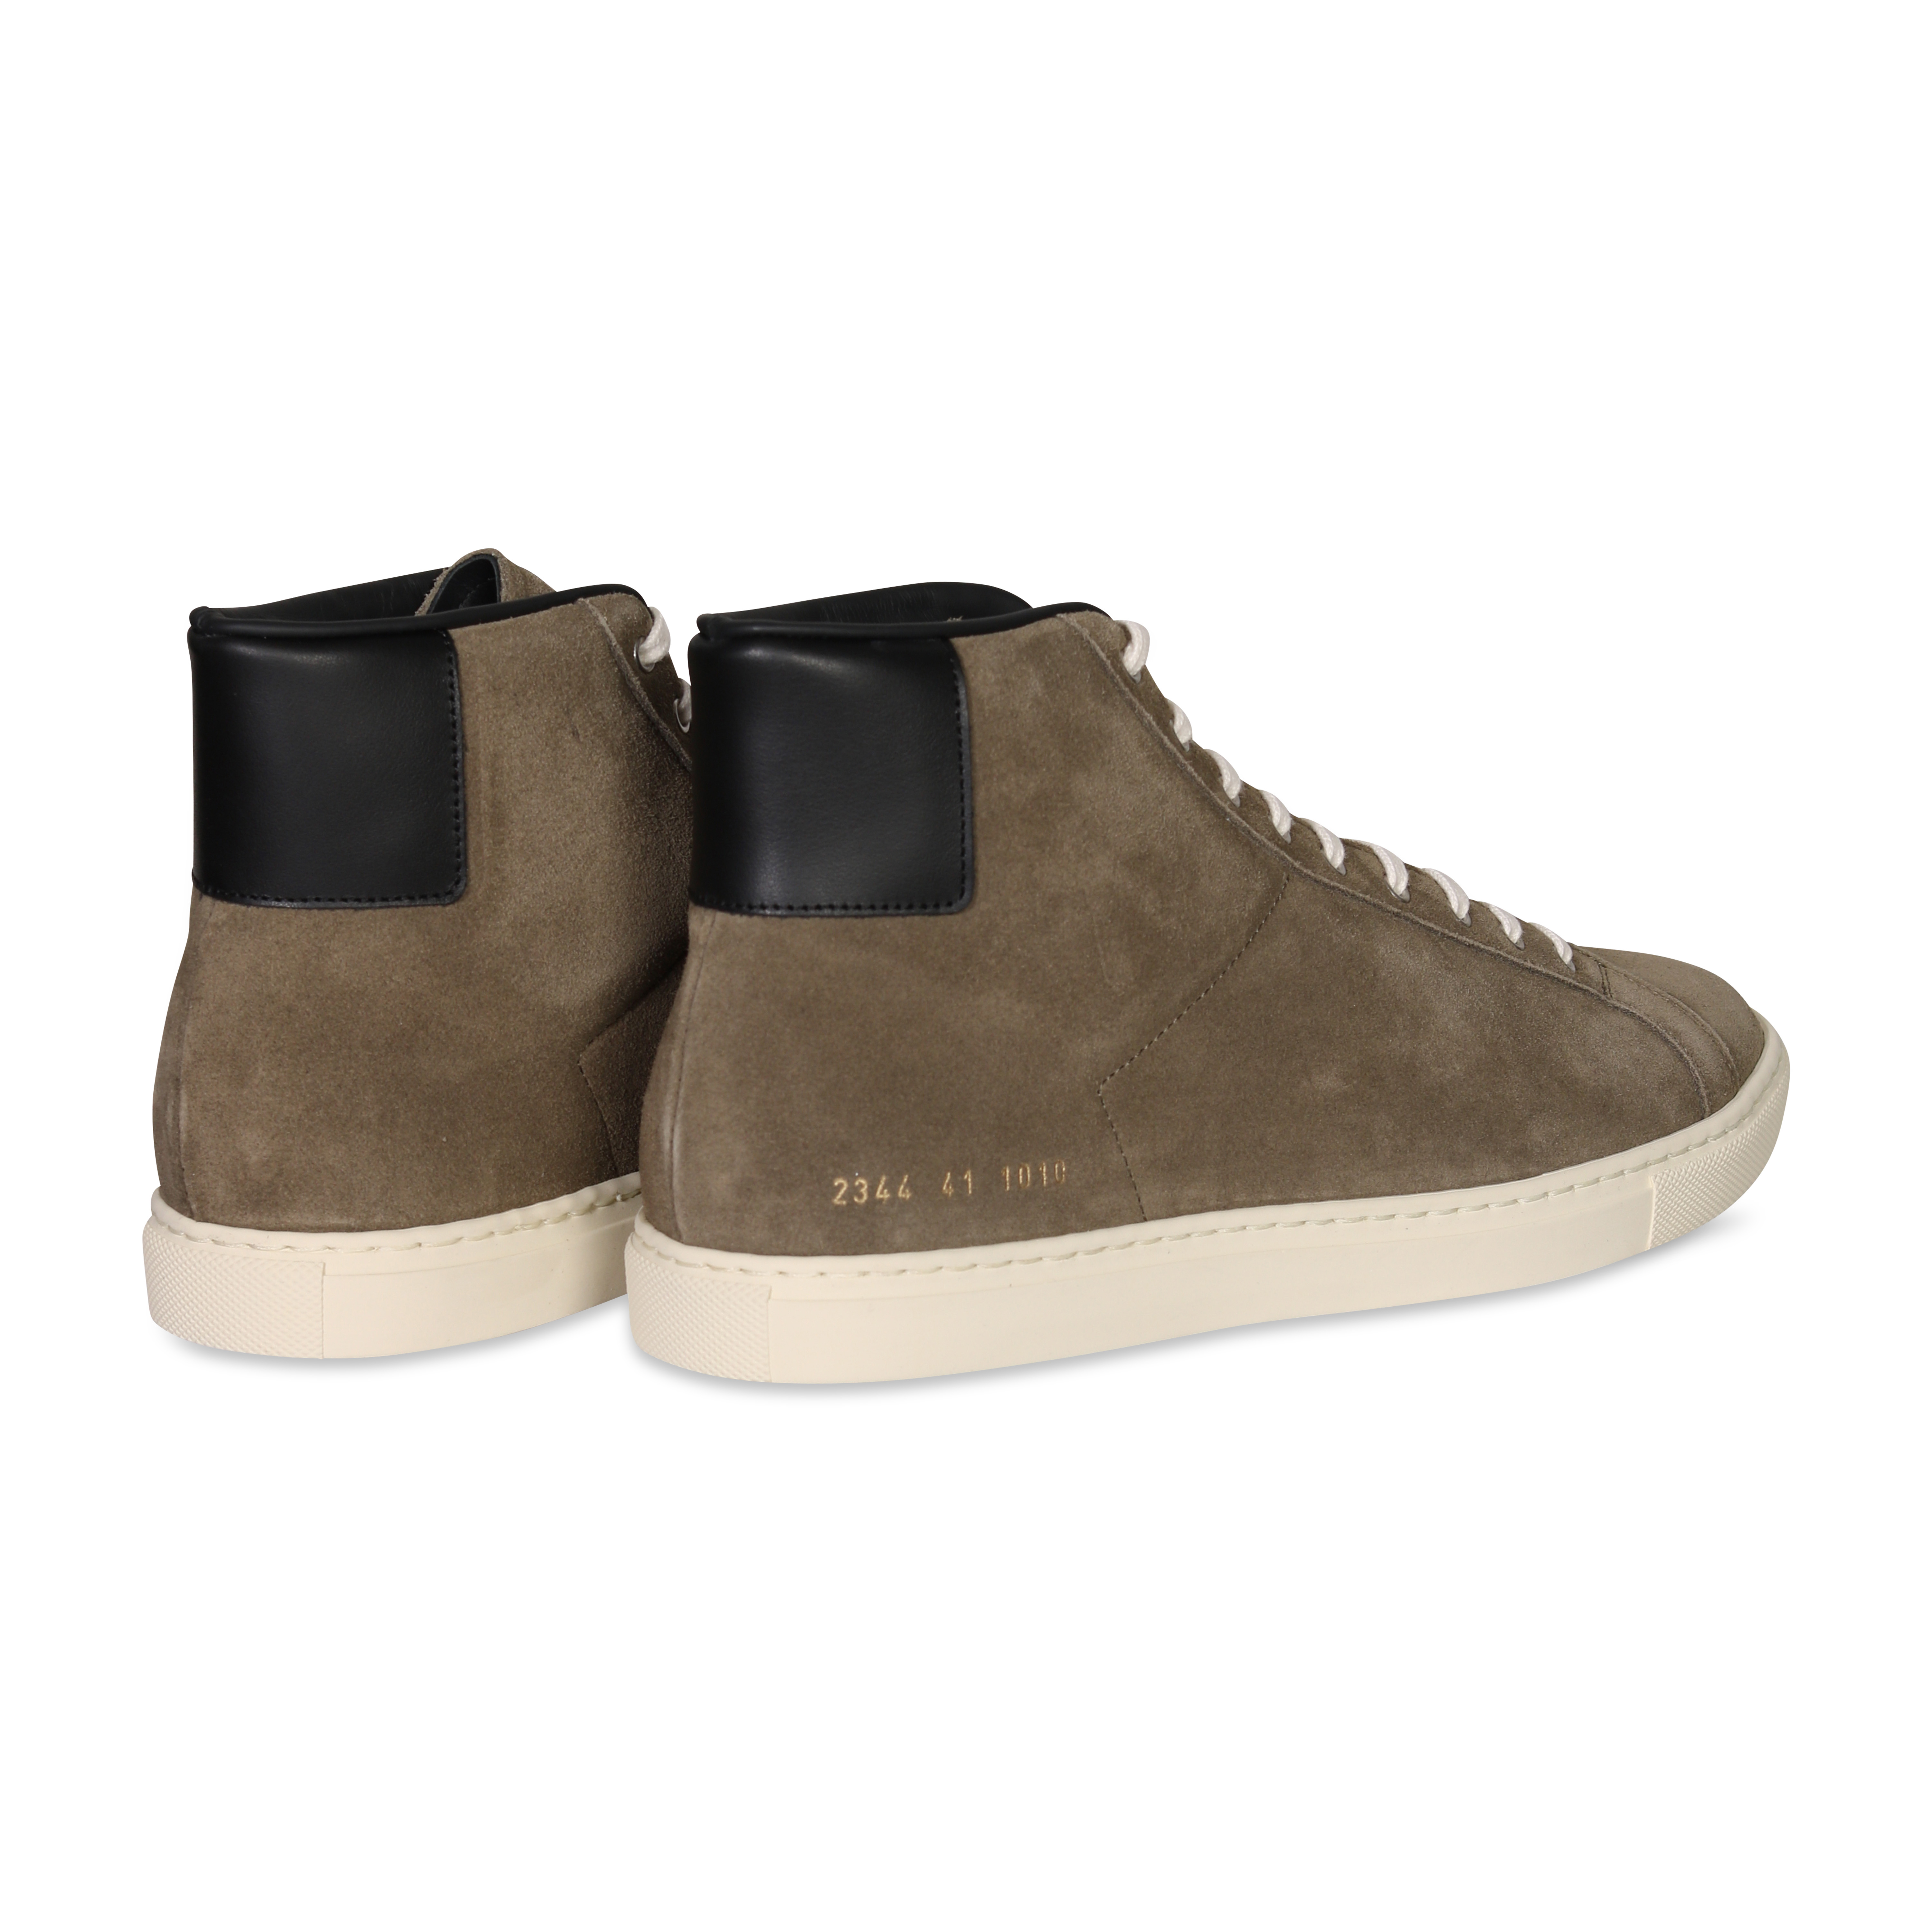 Common Projects Sneaker Retro High in Suede 41